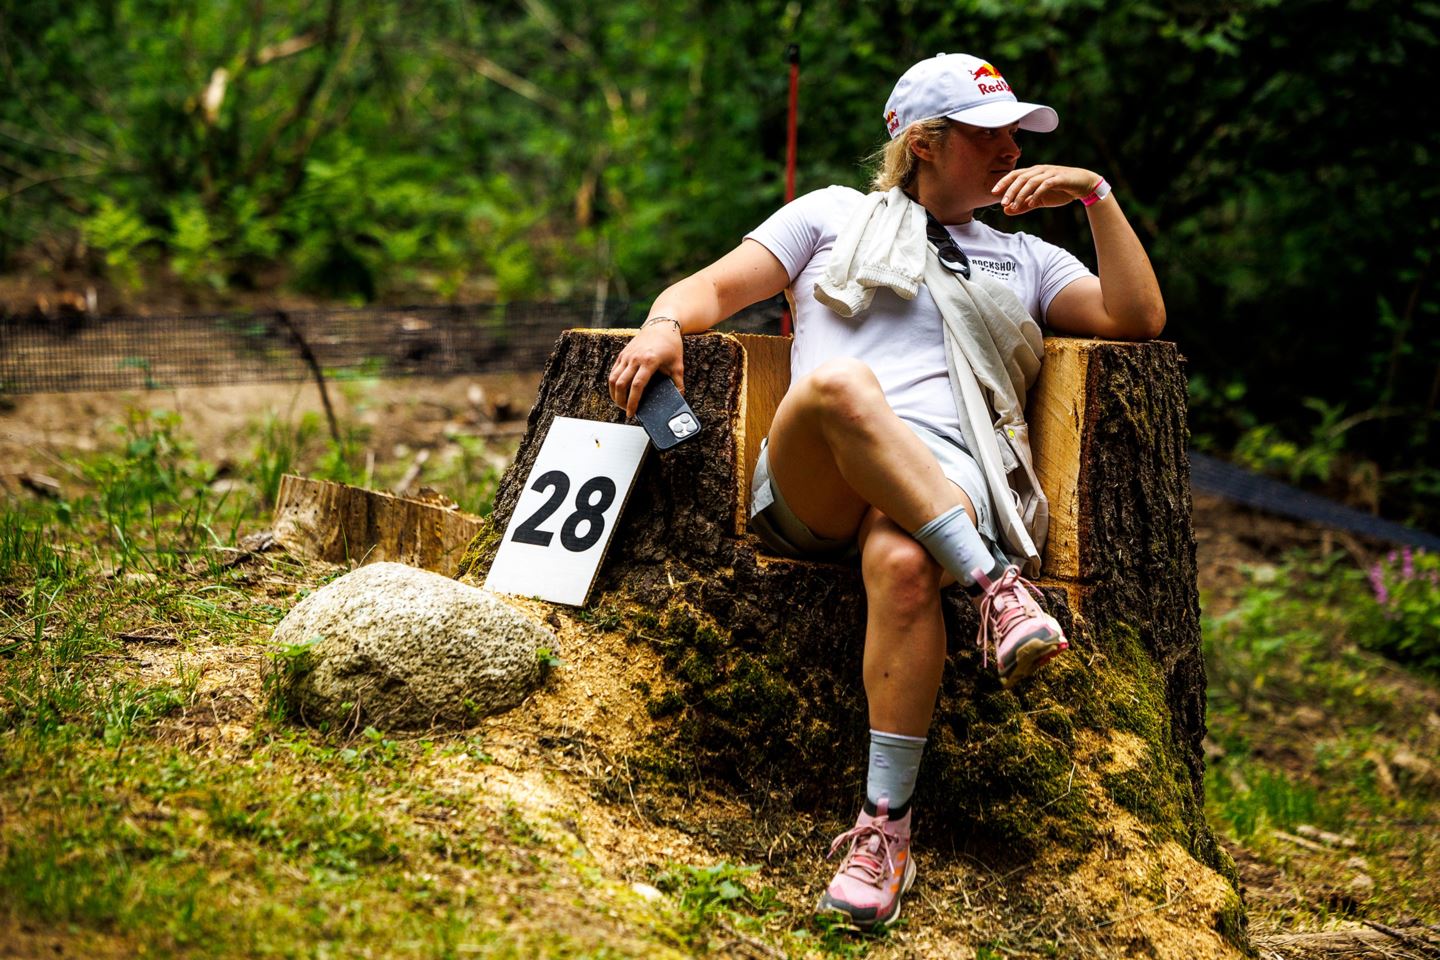 Vali sitting in a tree stump during the track walk in Val di Sole, Italy.